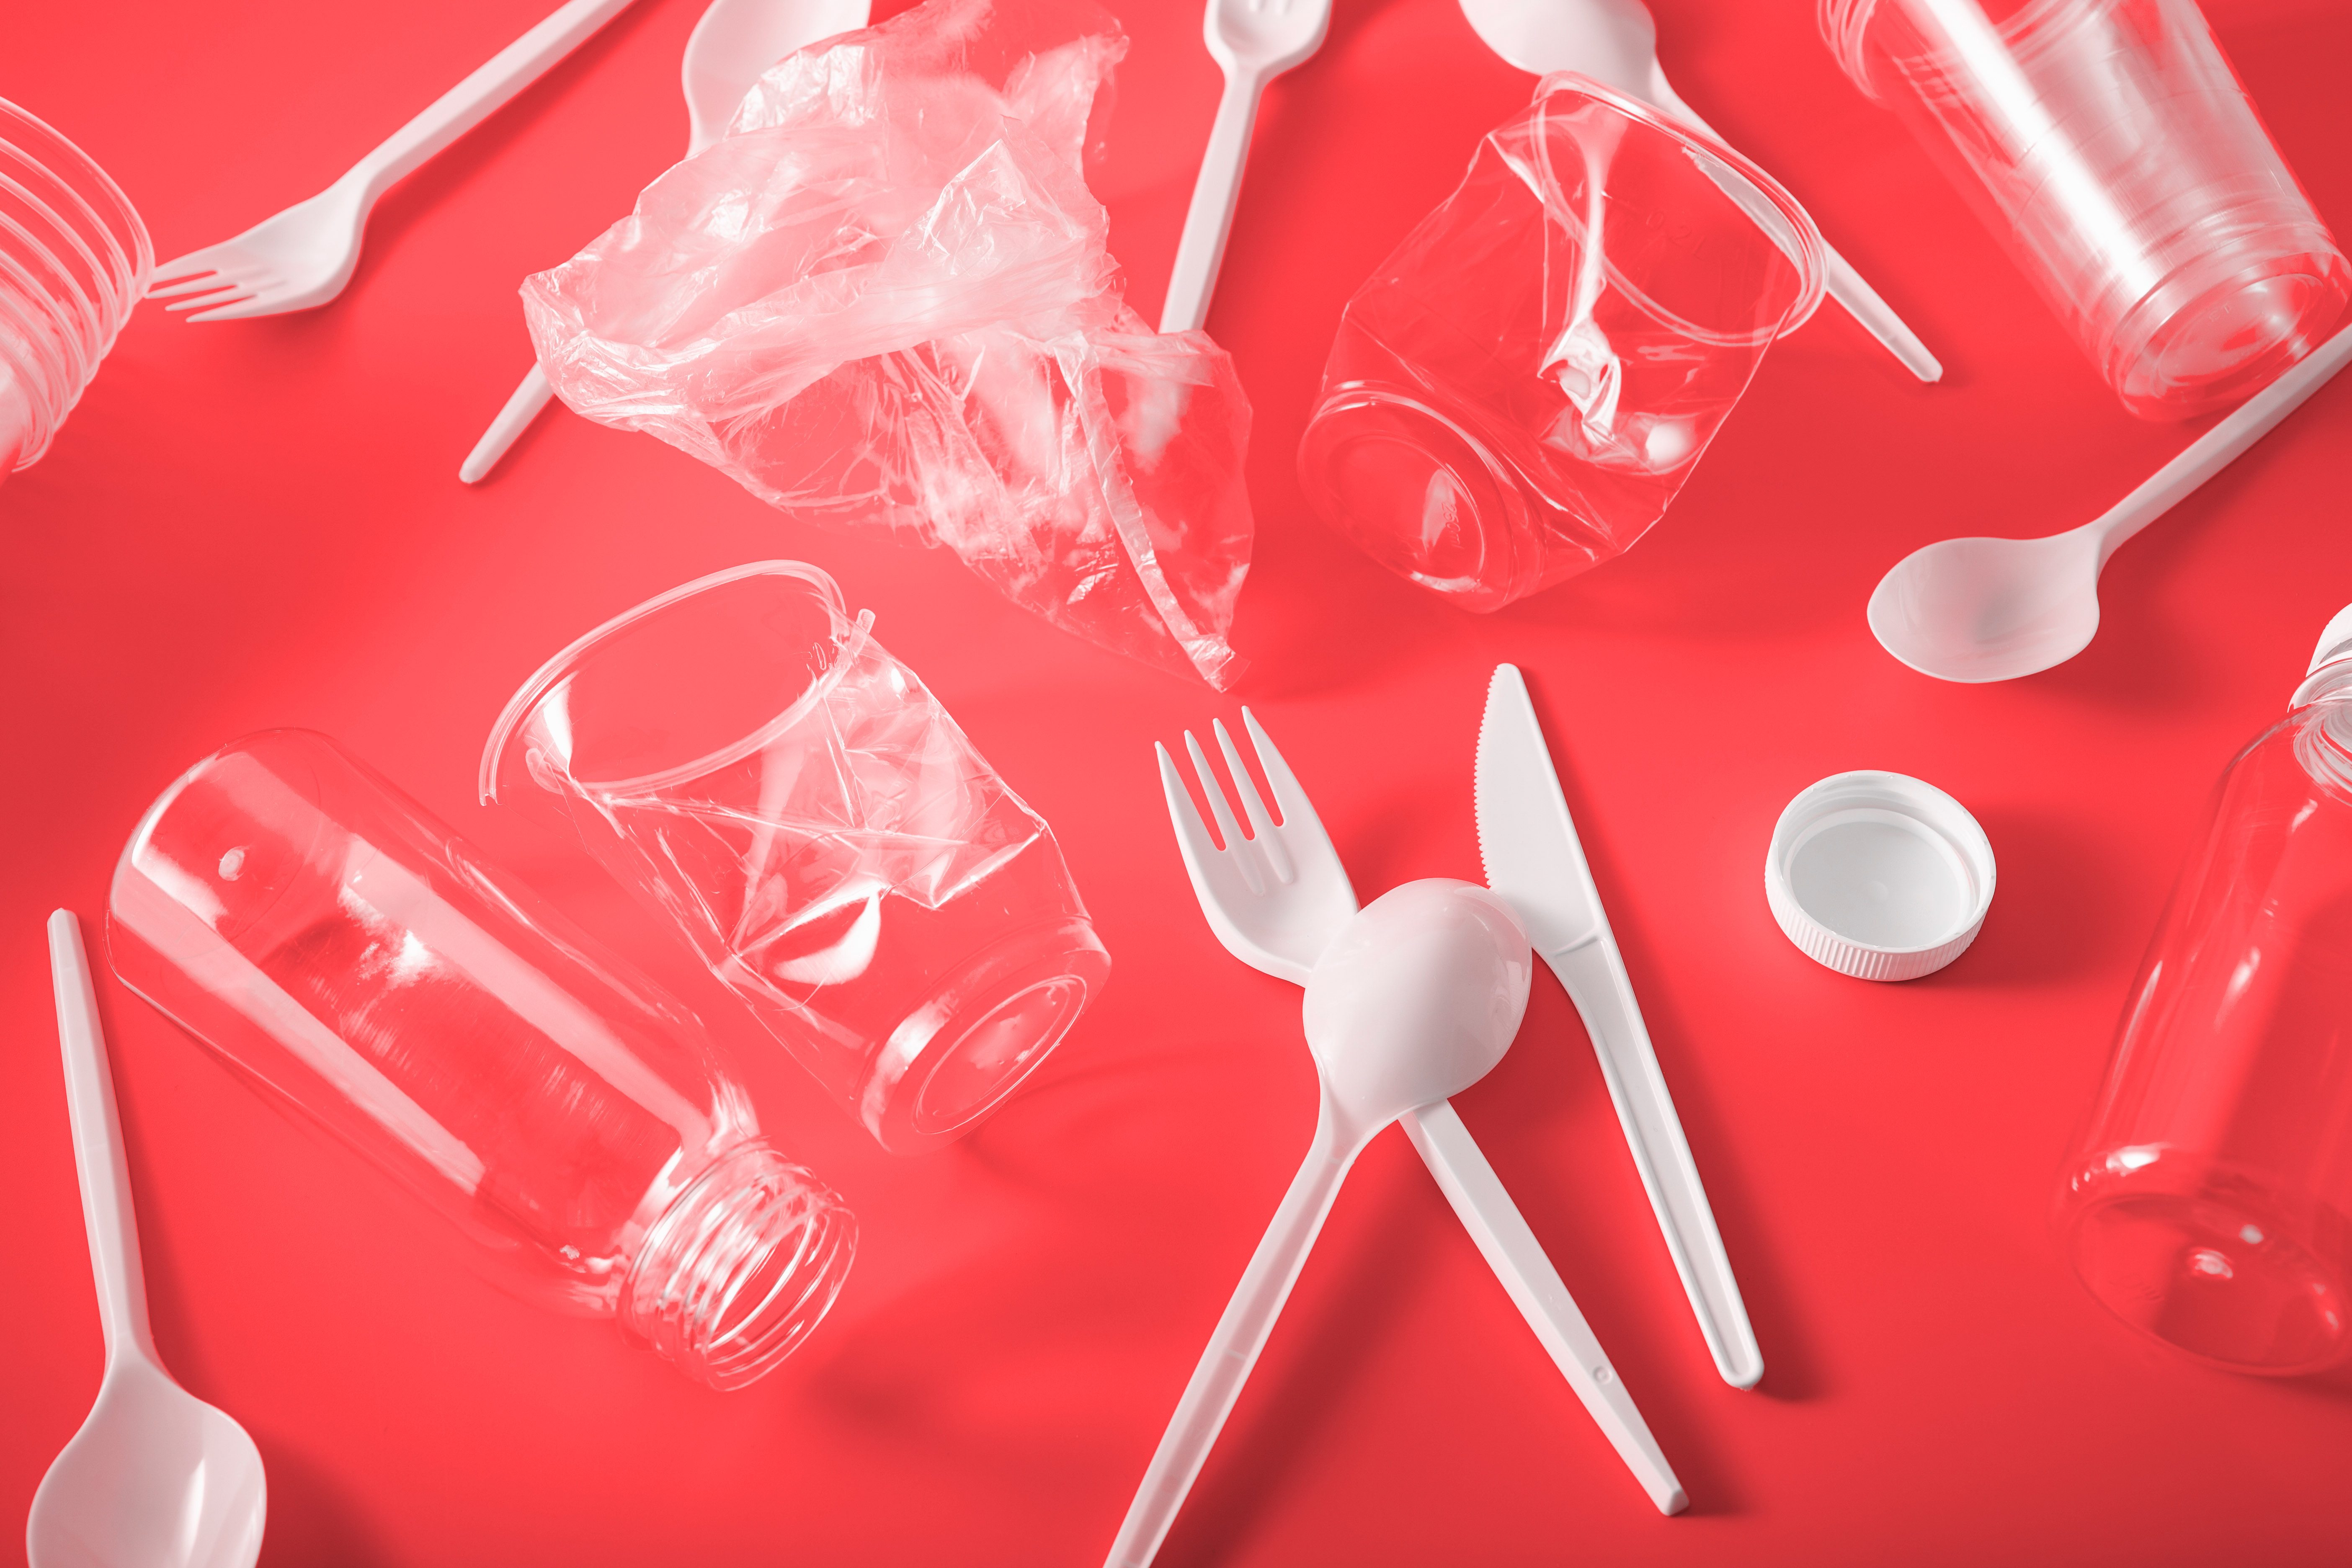 Let’s Be Clear About Single-Use Plastics